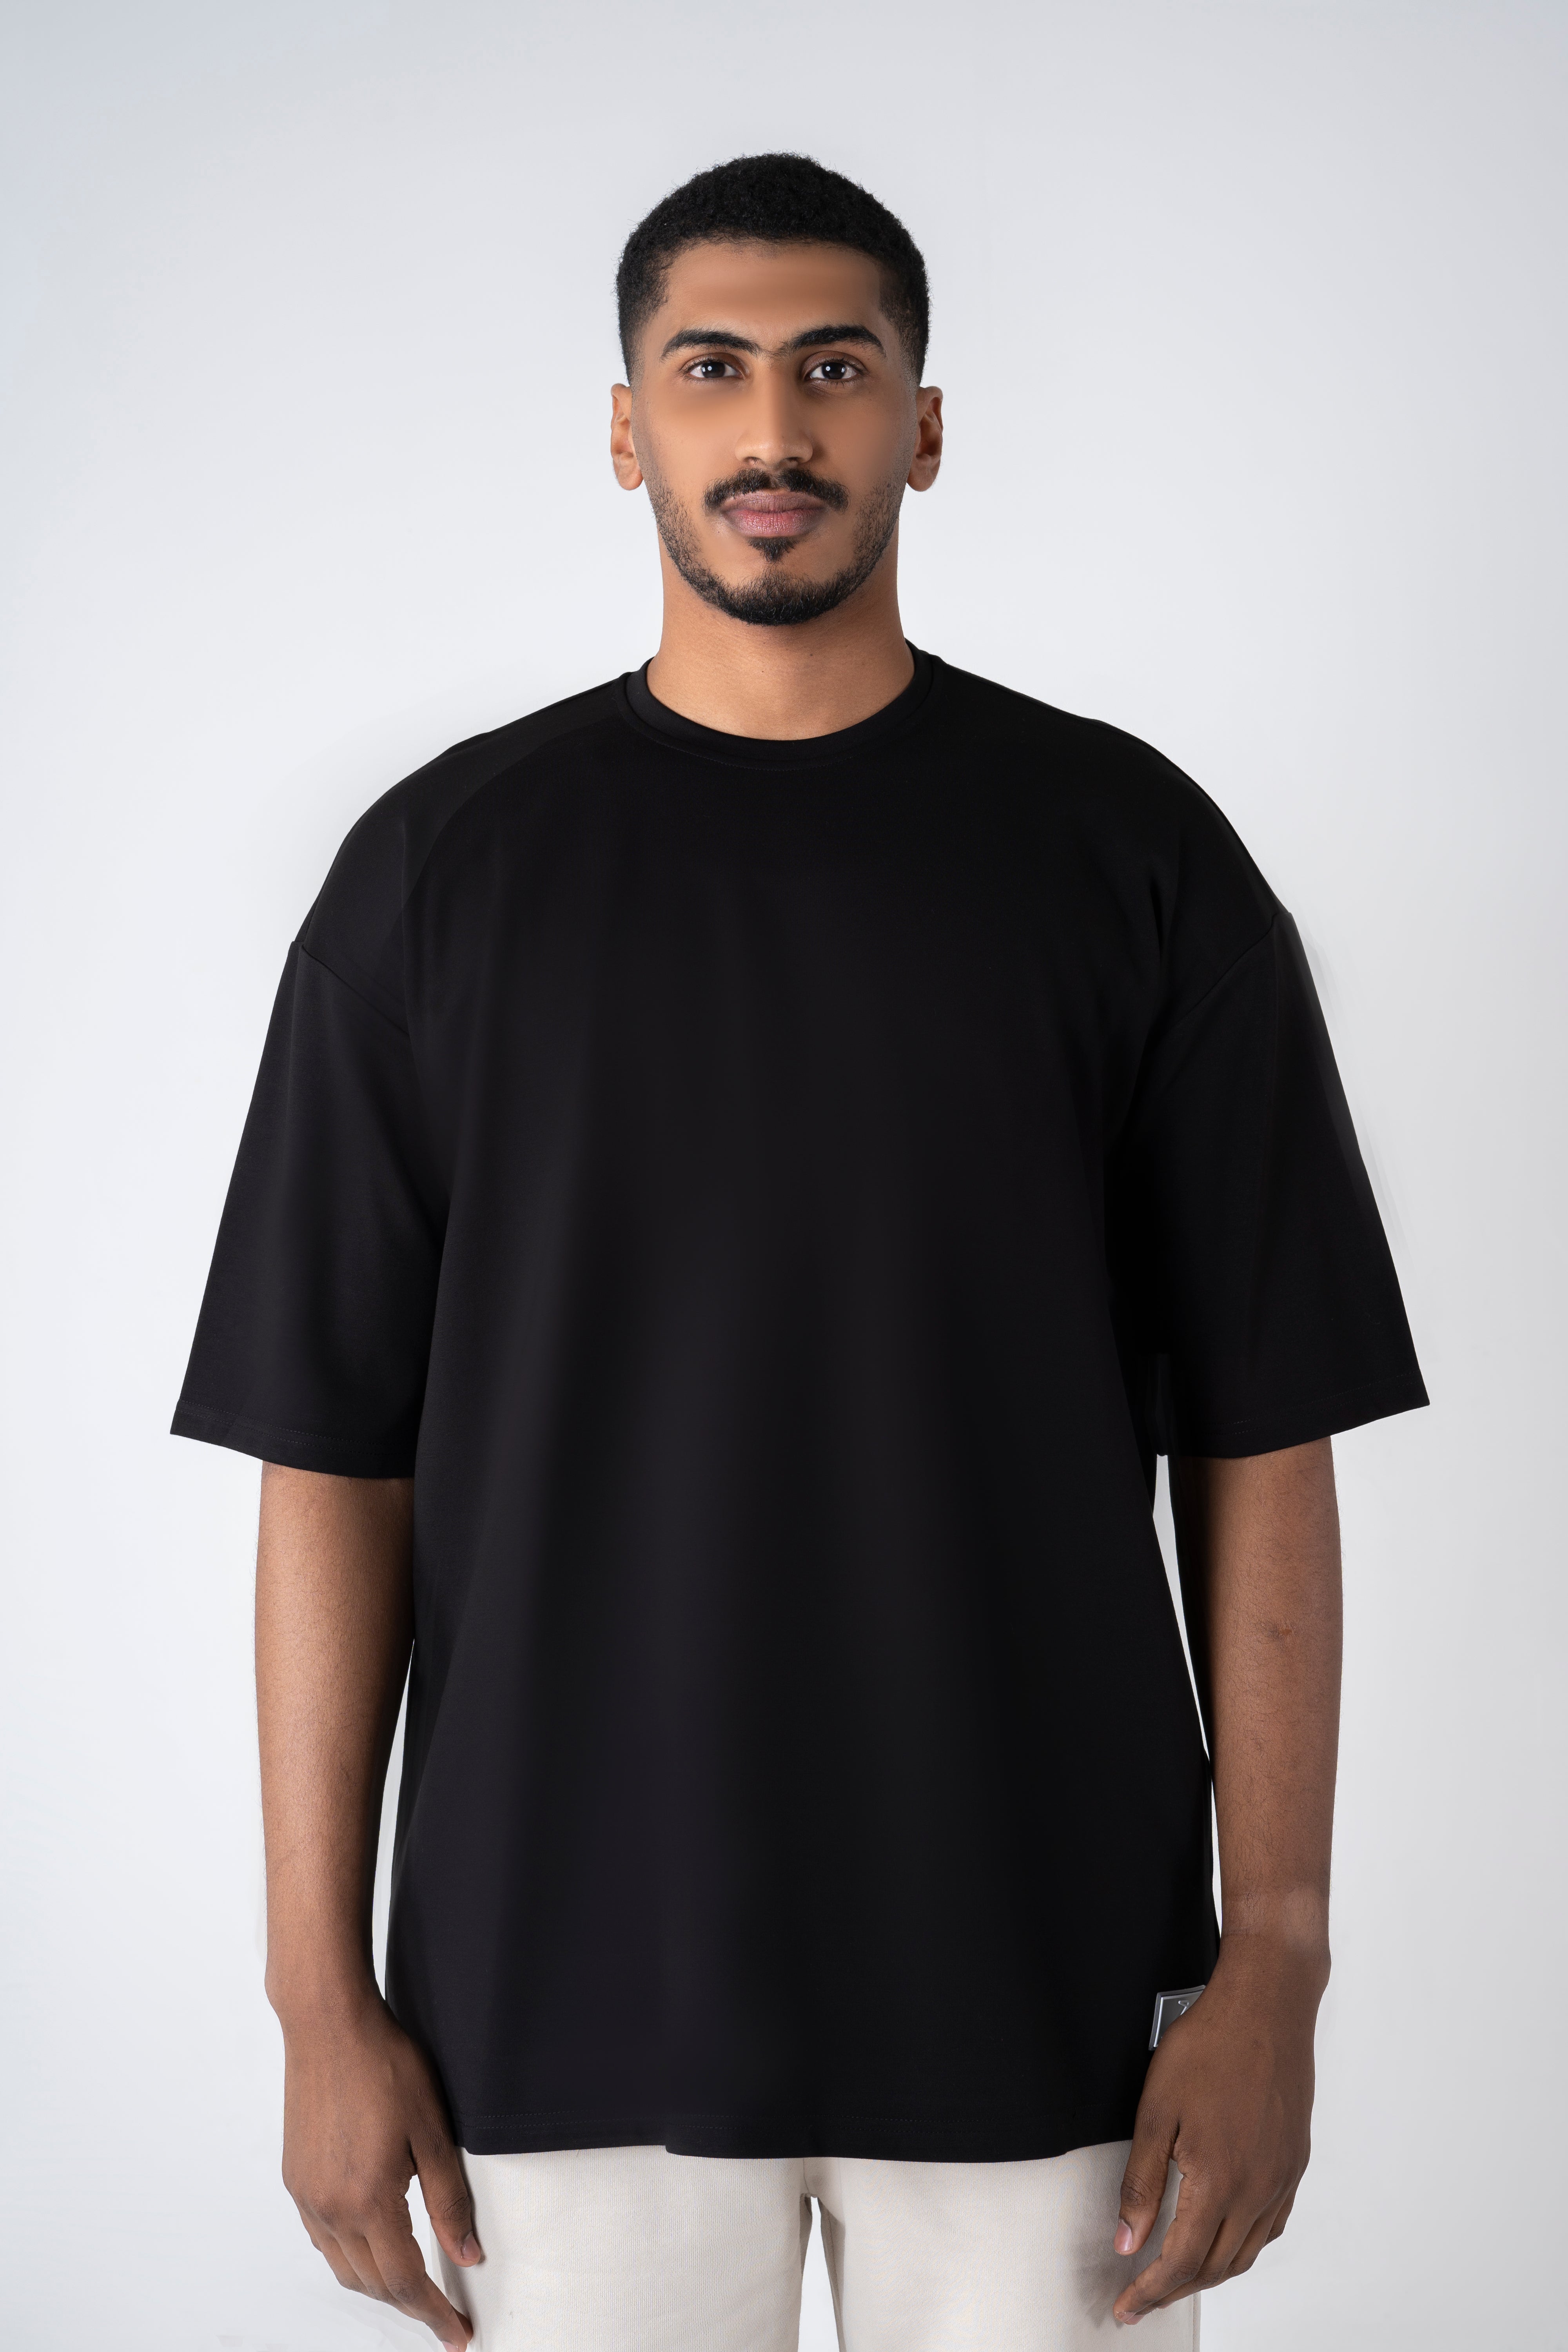 Black More T-shirt From Z Brand